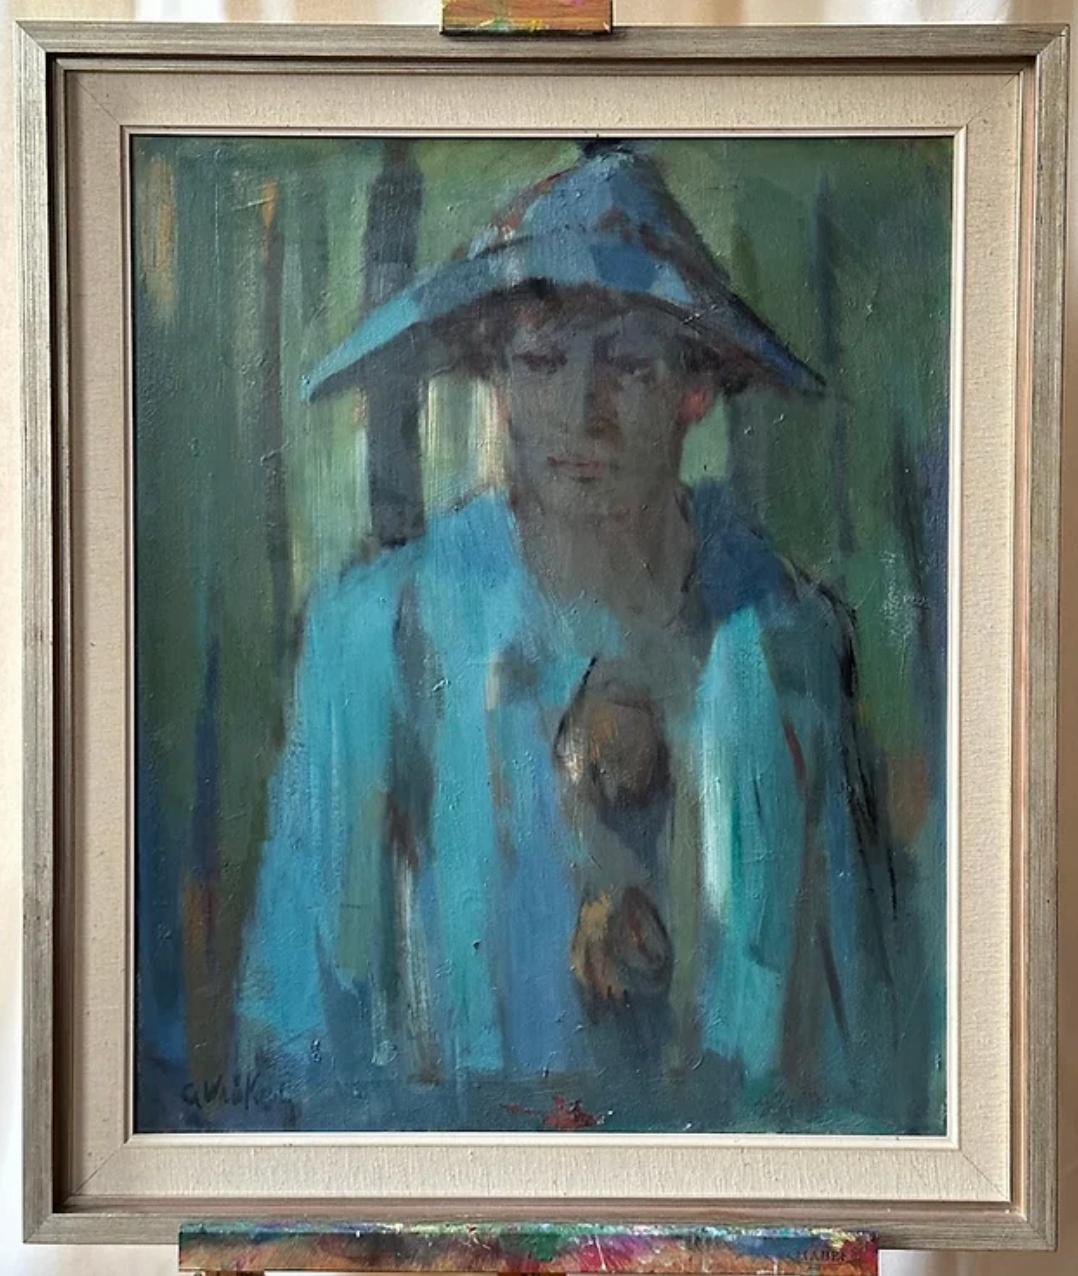 Framed Clown Oil Painting By Gertrud Wrake-Lindqvist, Signed.

Gertrud Wrake-Lindqvist. (Swedish, 1905–1996) Sweden.

This captivating portrait depicts a man dressed as a Harlequin. The artist captures his melancholic expression, using heavy,